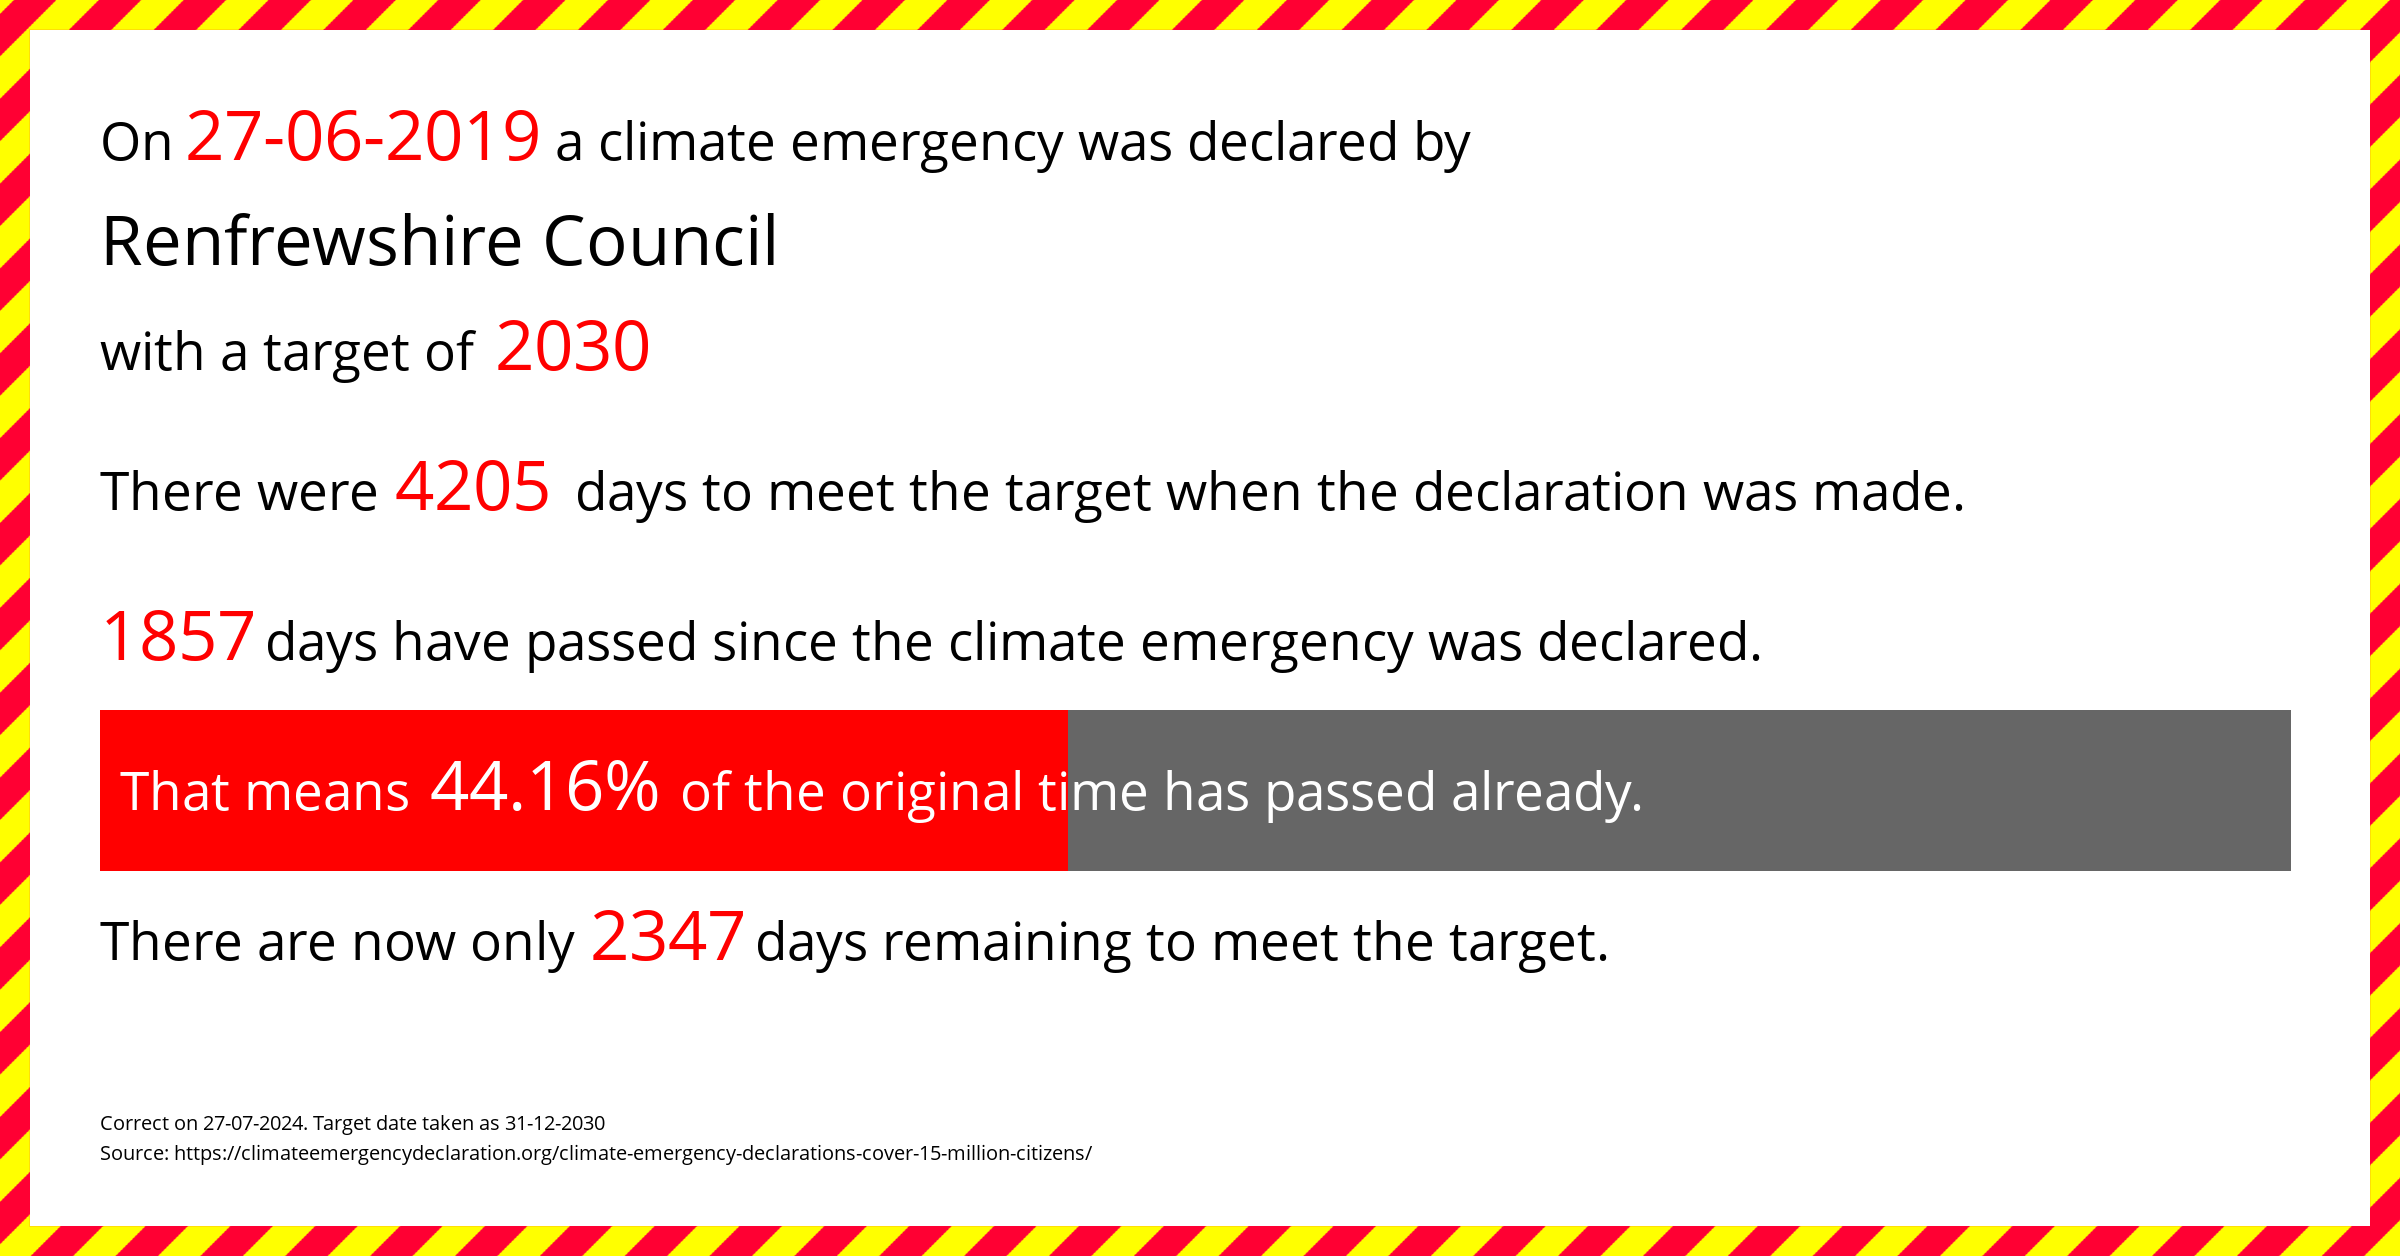 Renfrewshire Council declared a Climate emergency on Thursday 27th June 2019, with a target of 2030.